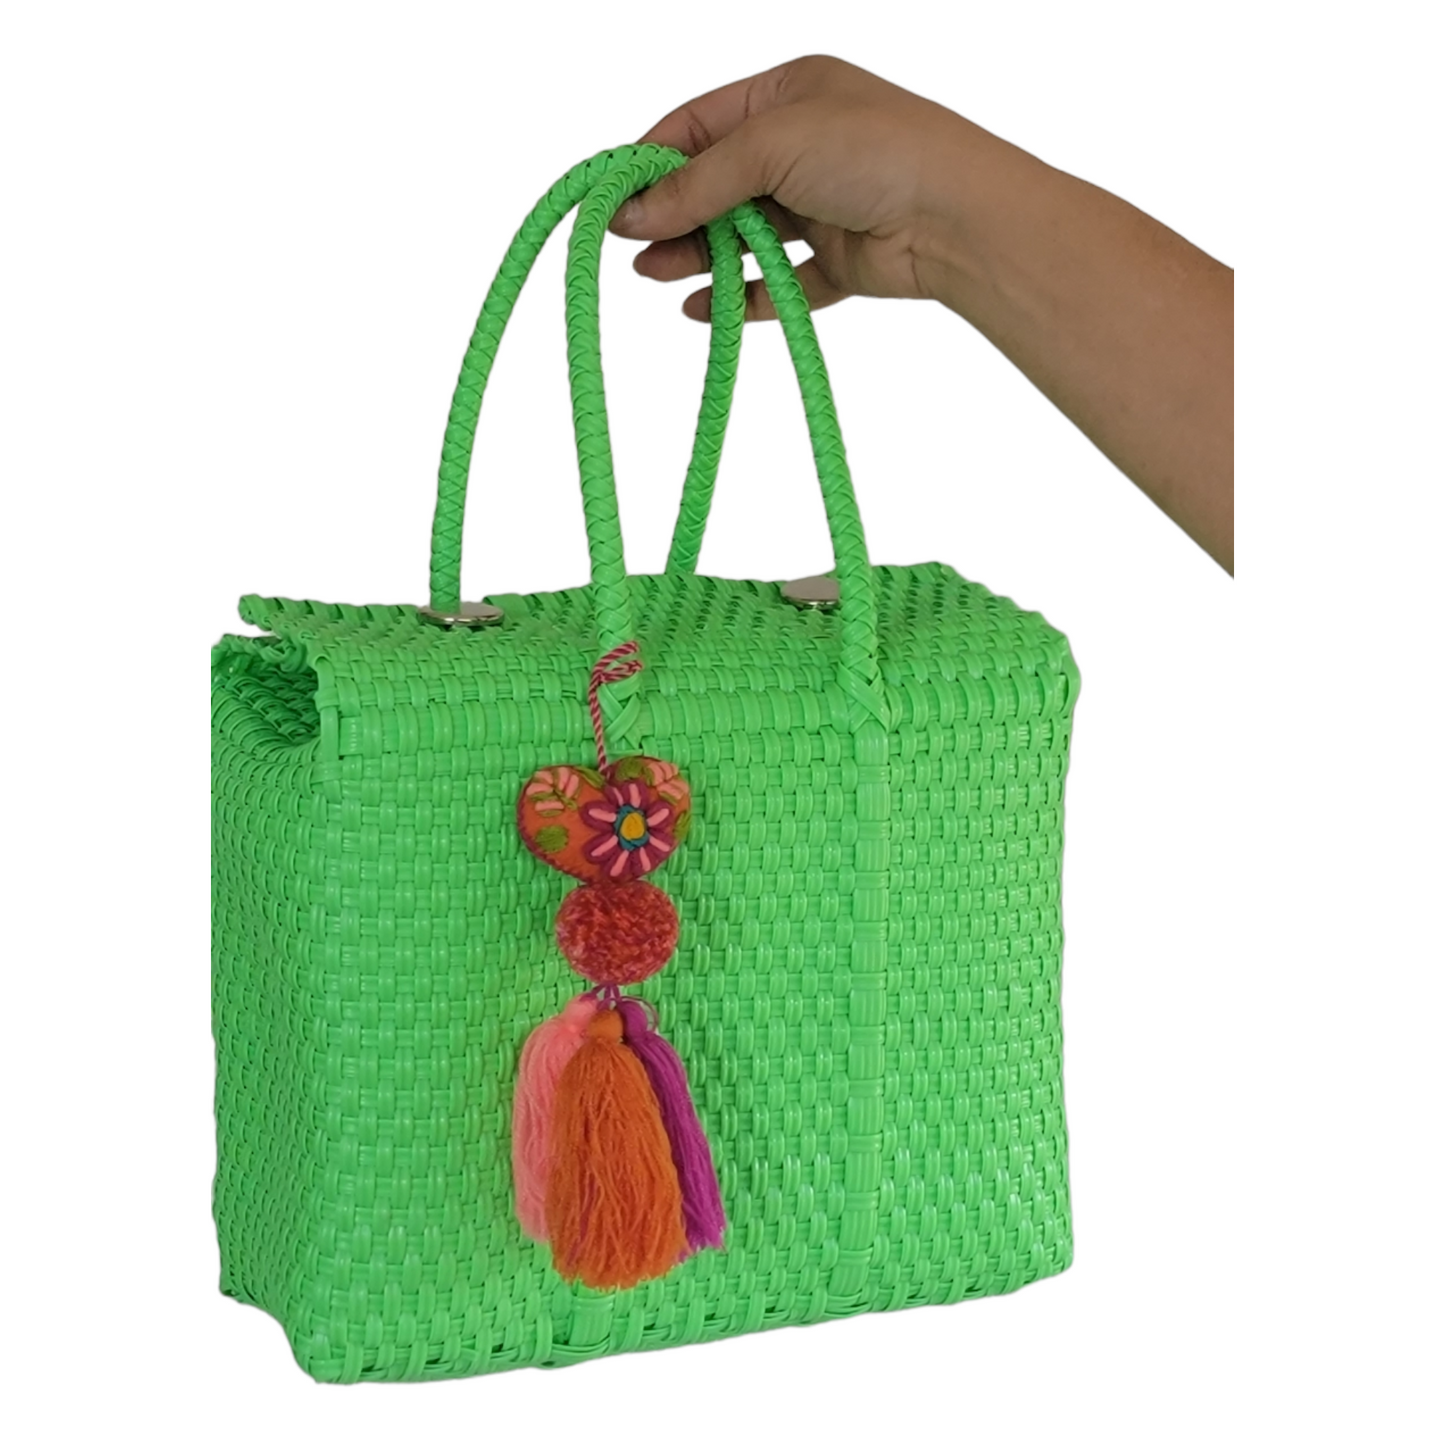 Lime Green Medium Basket | Lunch Basket | Handwoven Recycled Bags